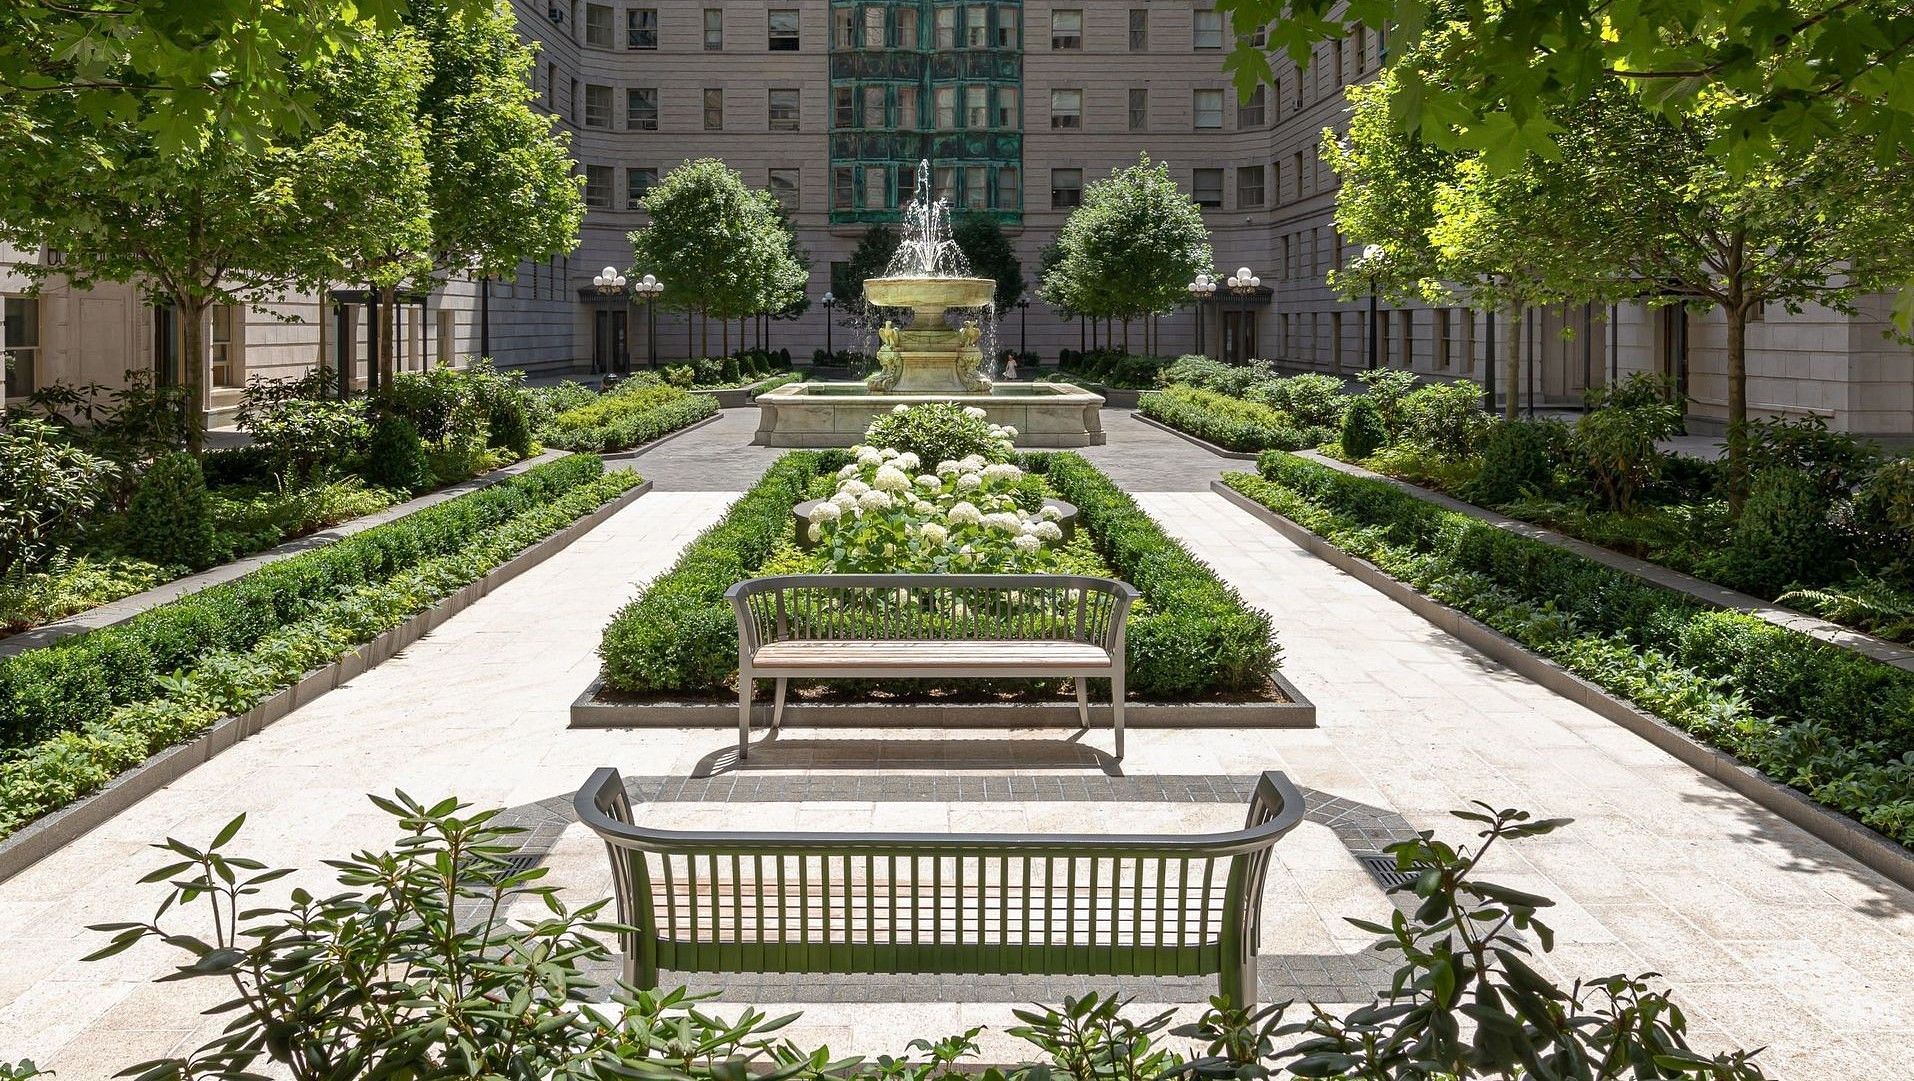 The Belnord is an iconic landscape in Manhattan (Image via The Belnord)